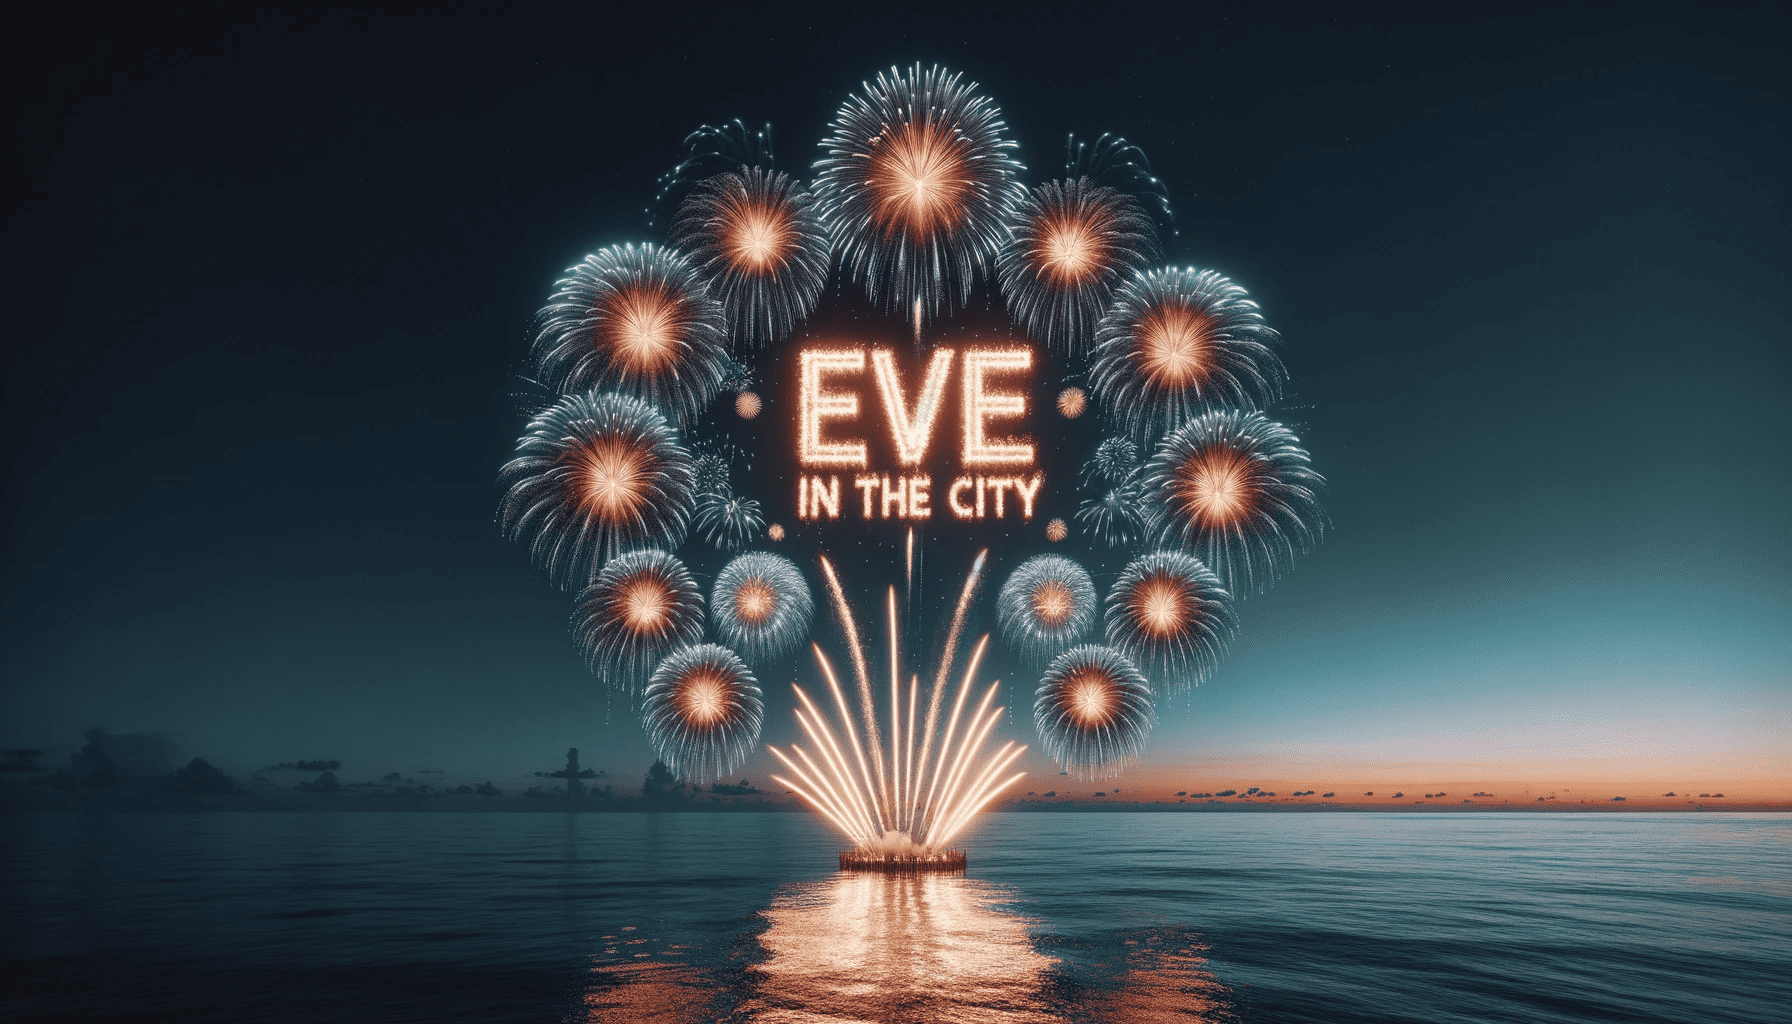 Eve in the City: Devonport’s Grand New Year Celebration